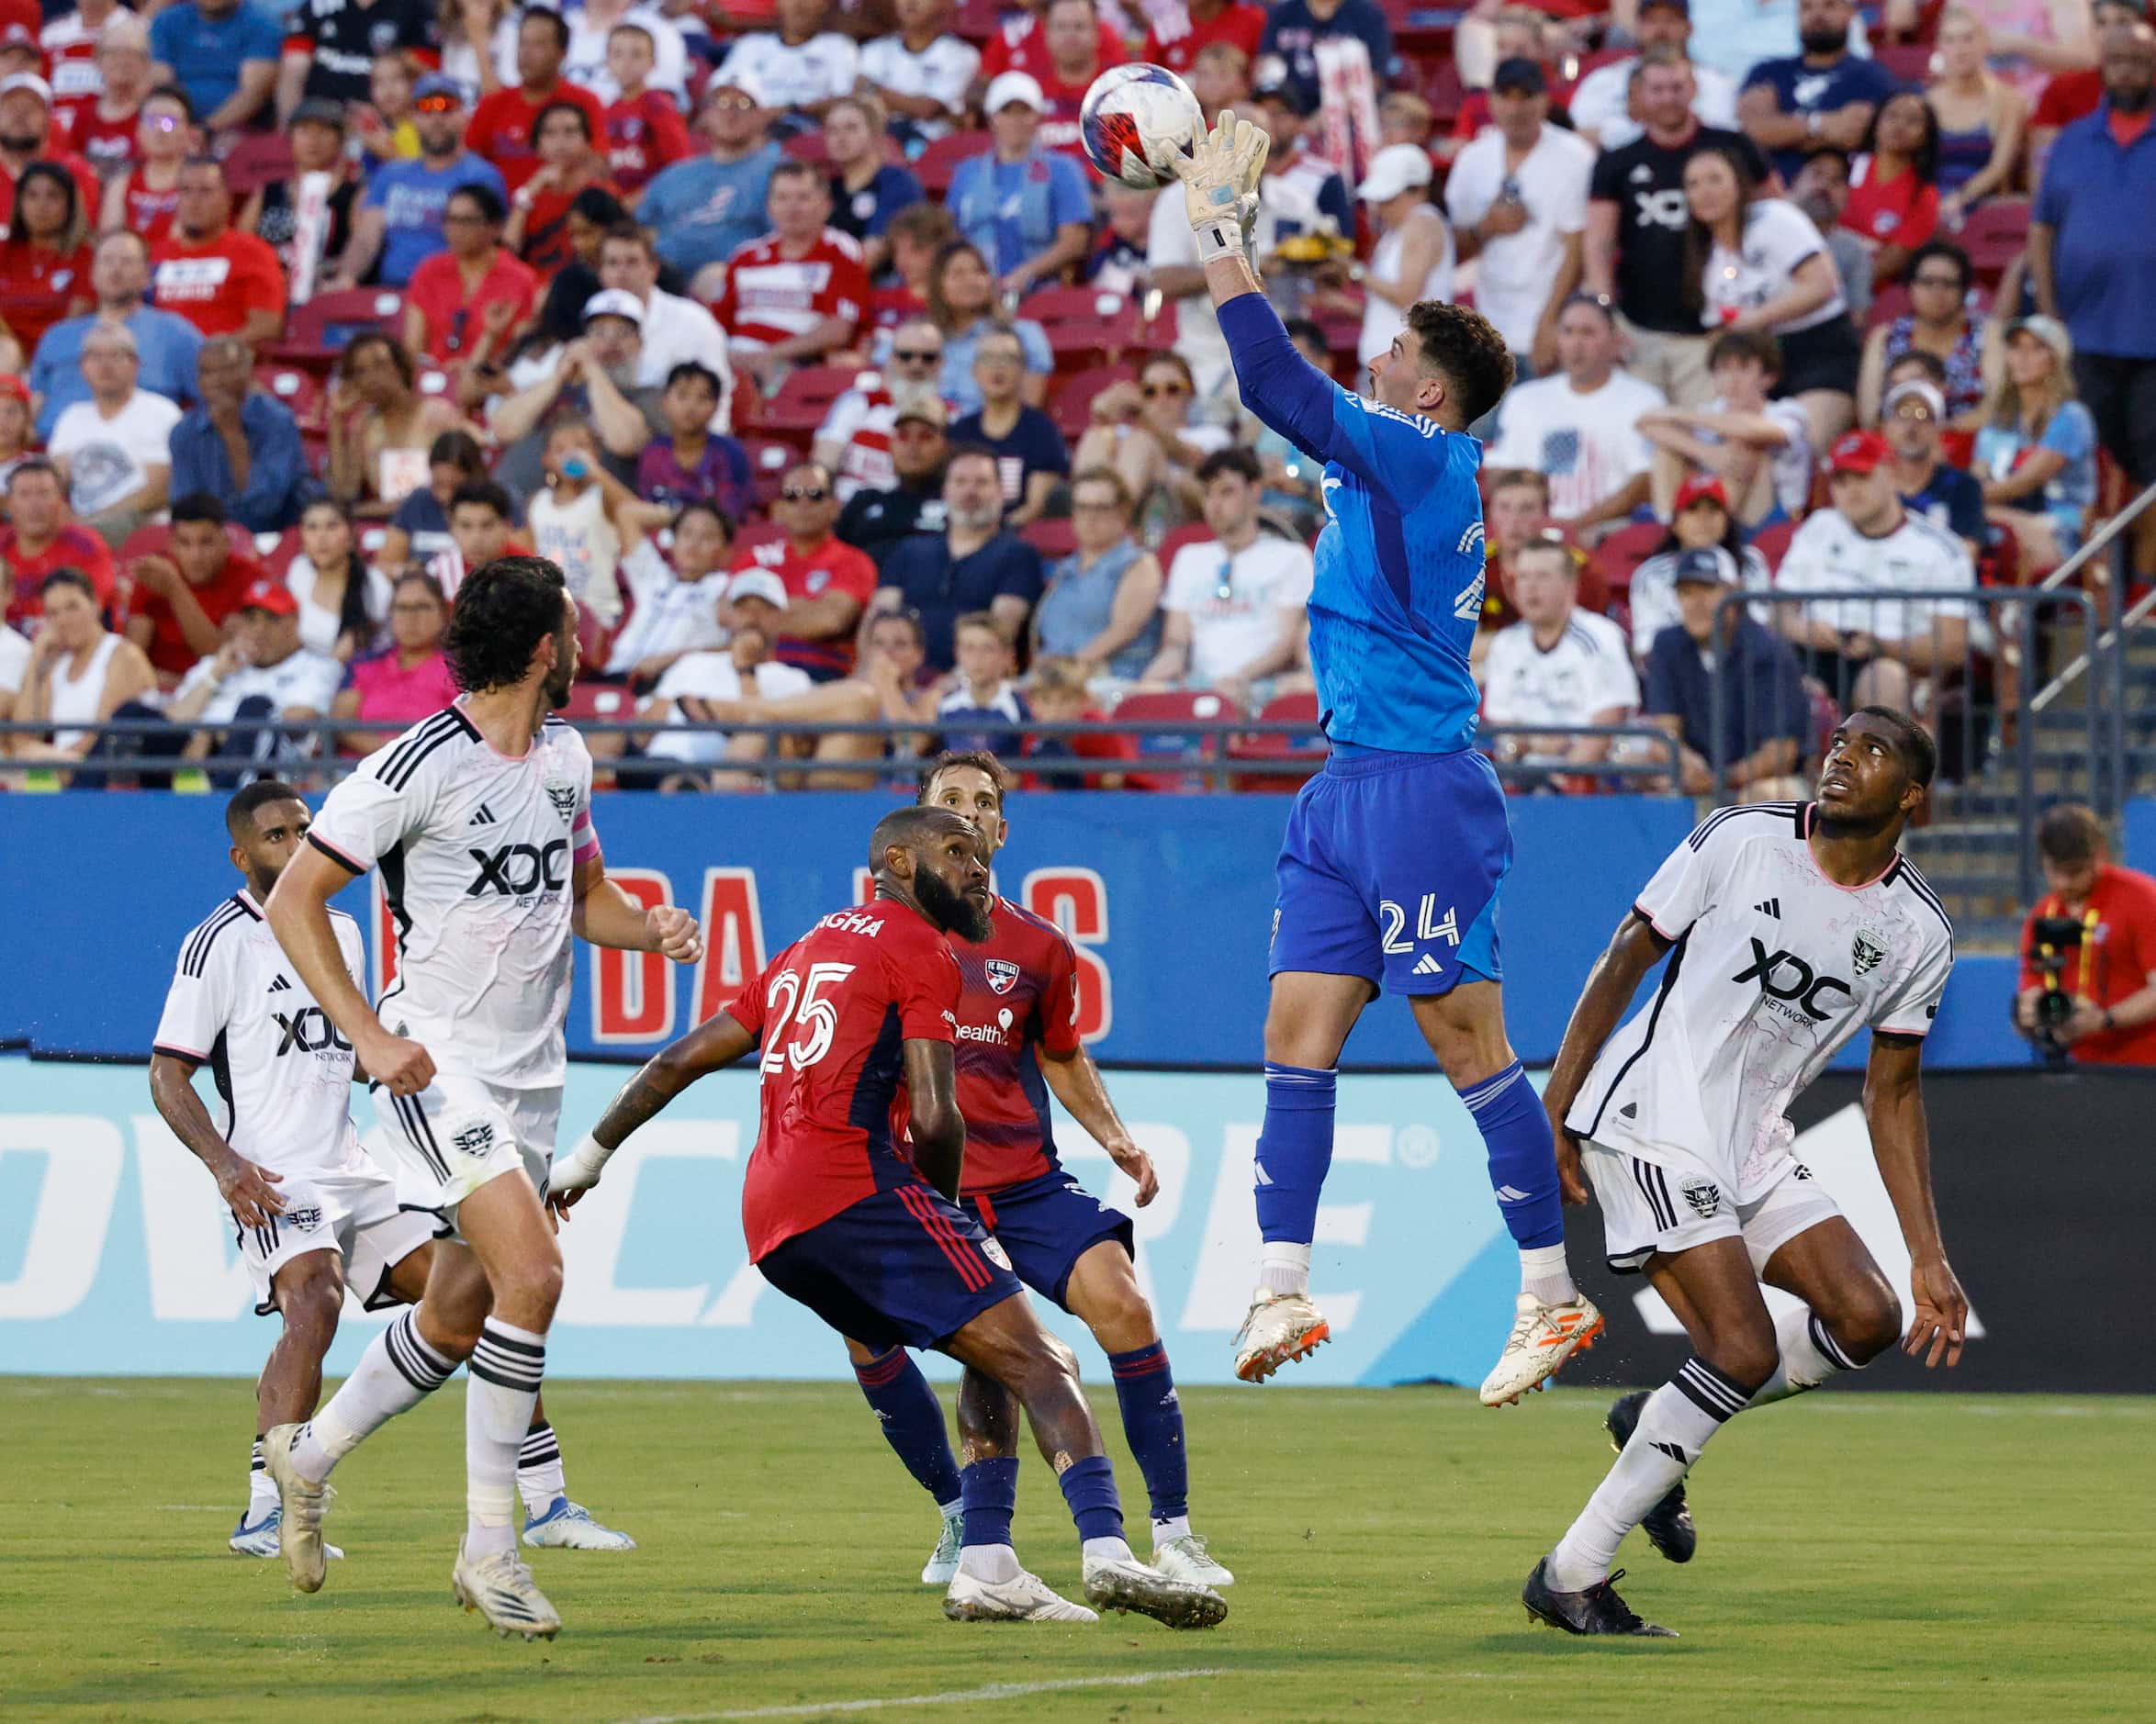 D.C. United goalkeeper Alex Bono (24) jumps to secure the ball over FC Dallas defender...